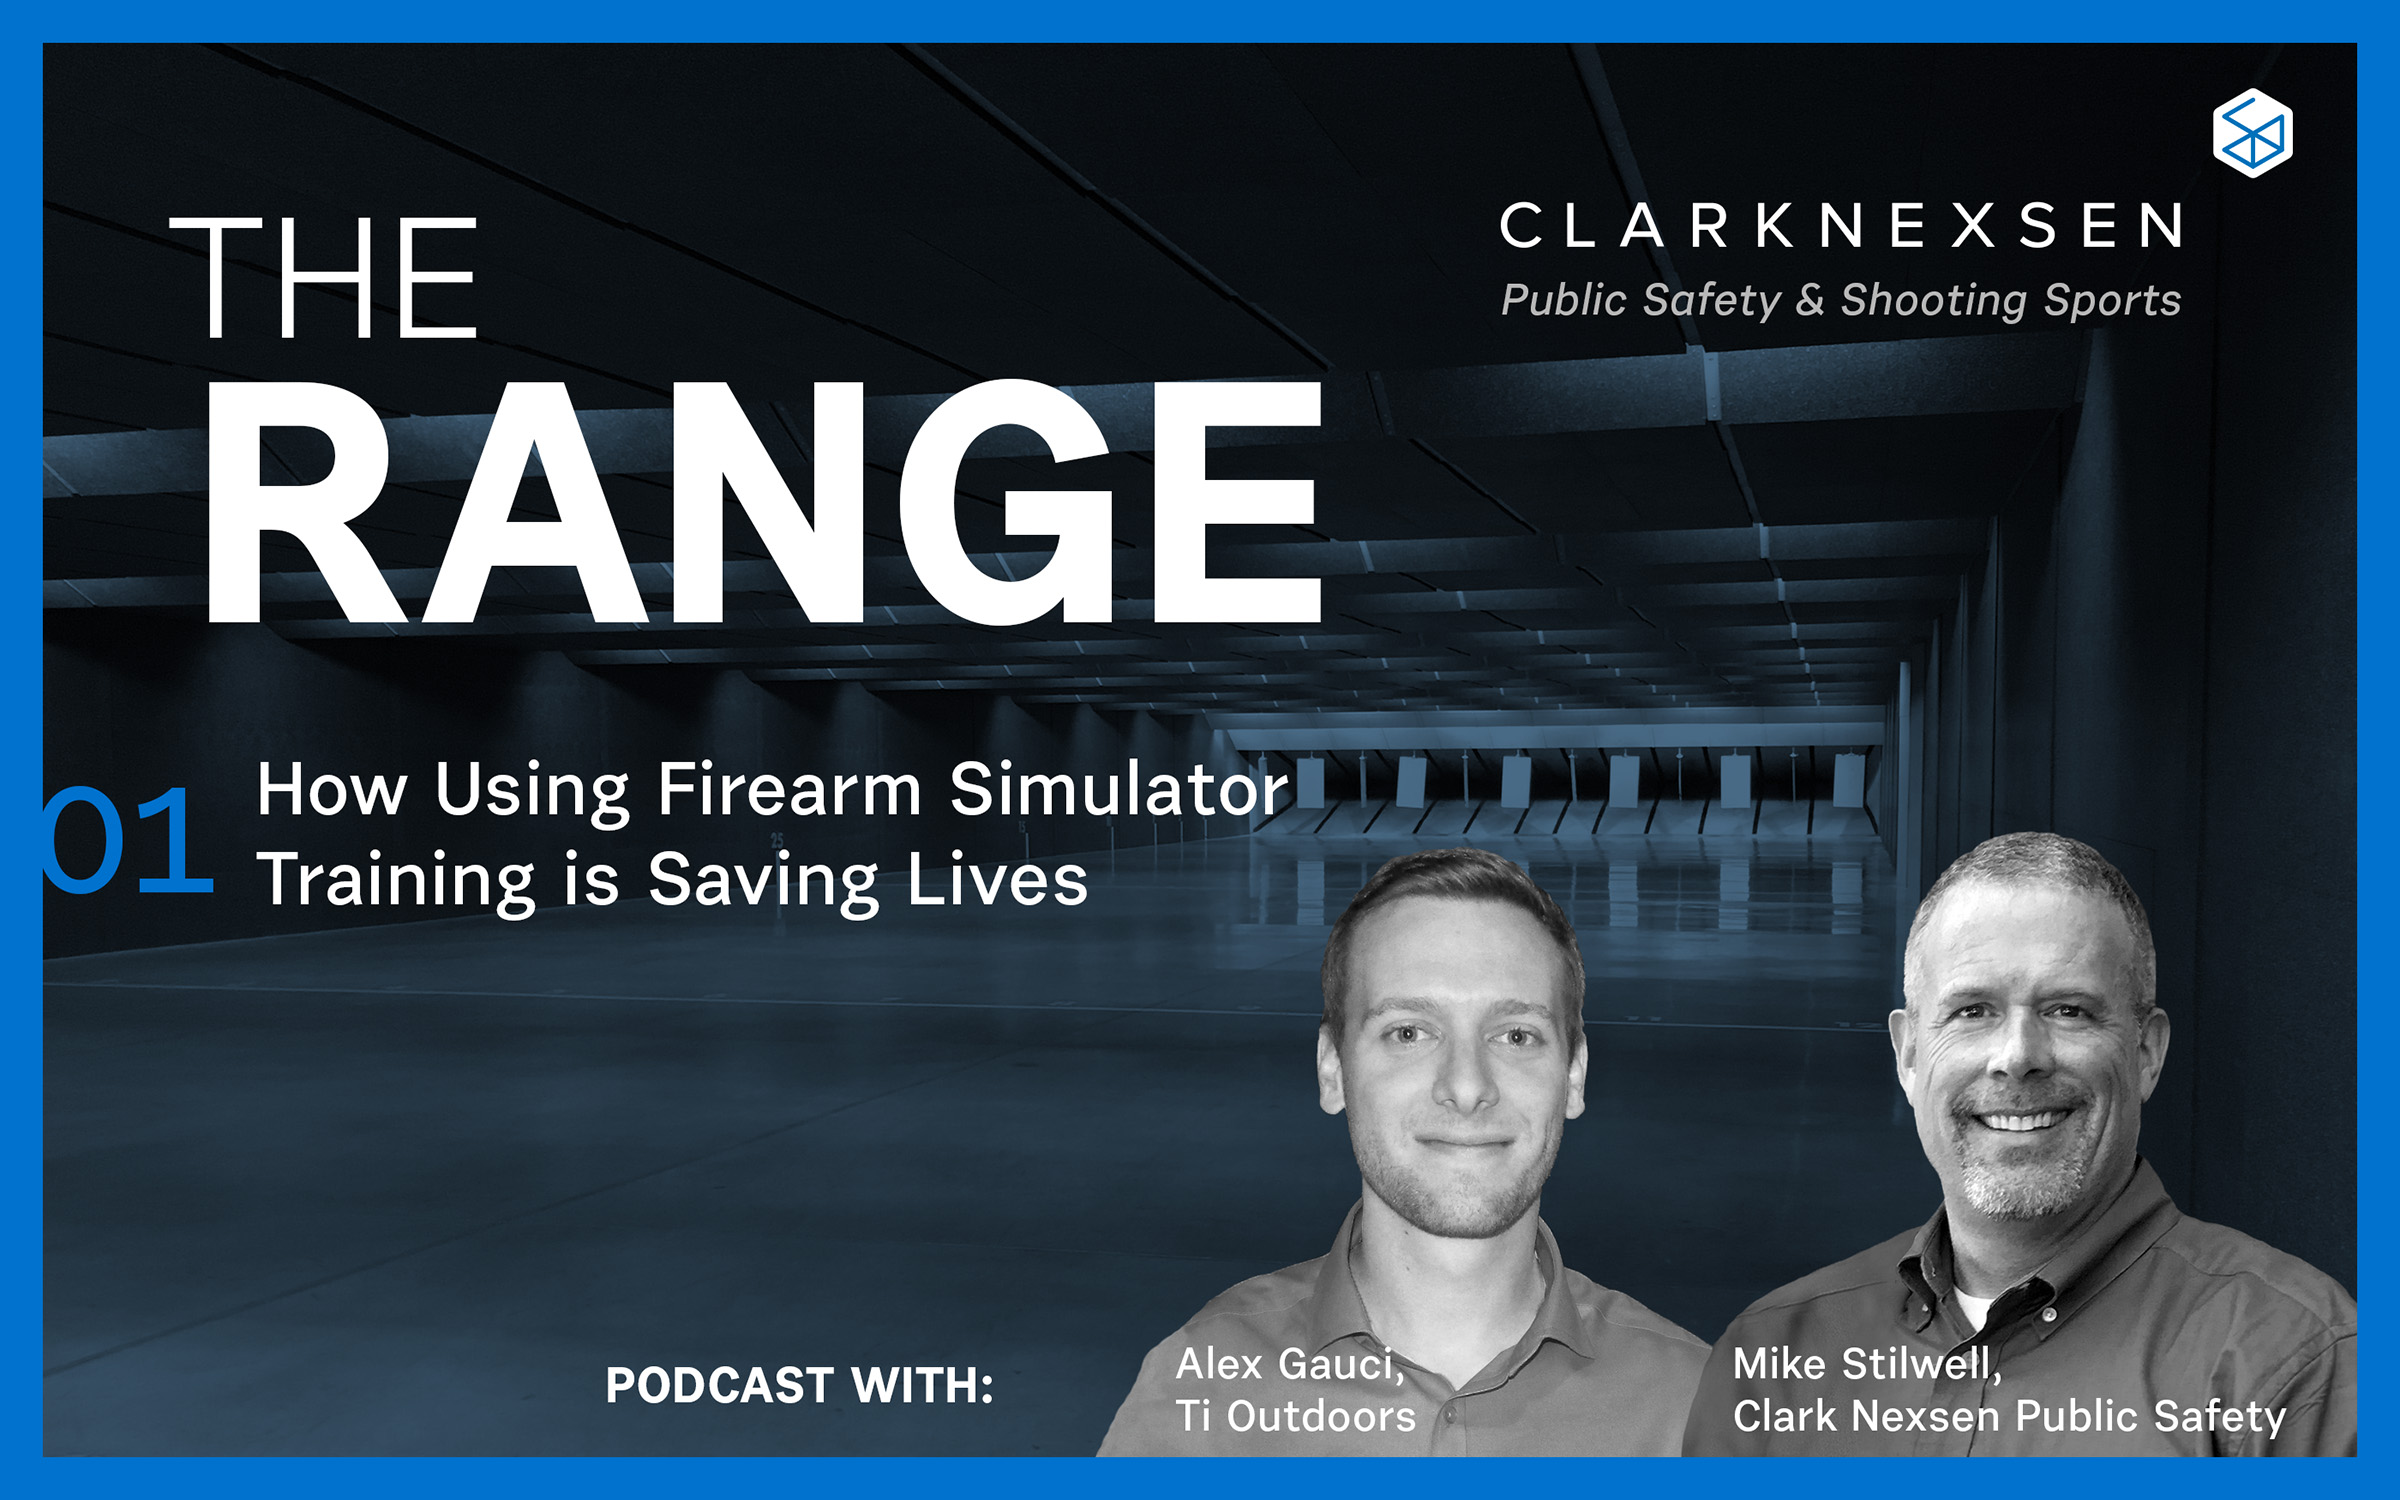 The Range Podcast: Why proper HVAC is Vital in an Indoor Range Environment